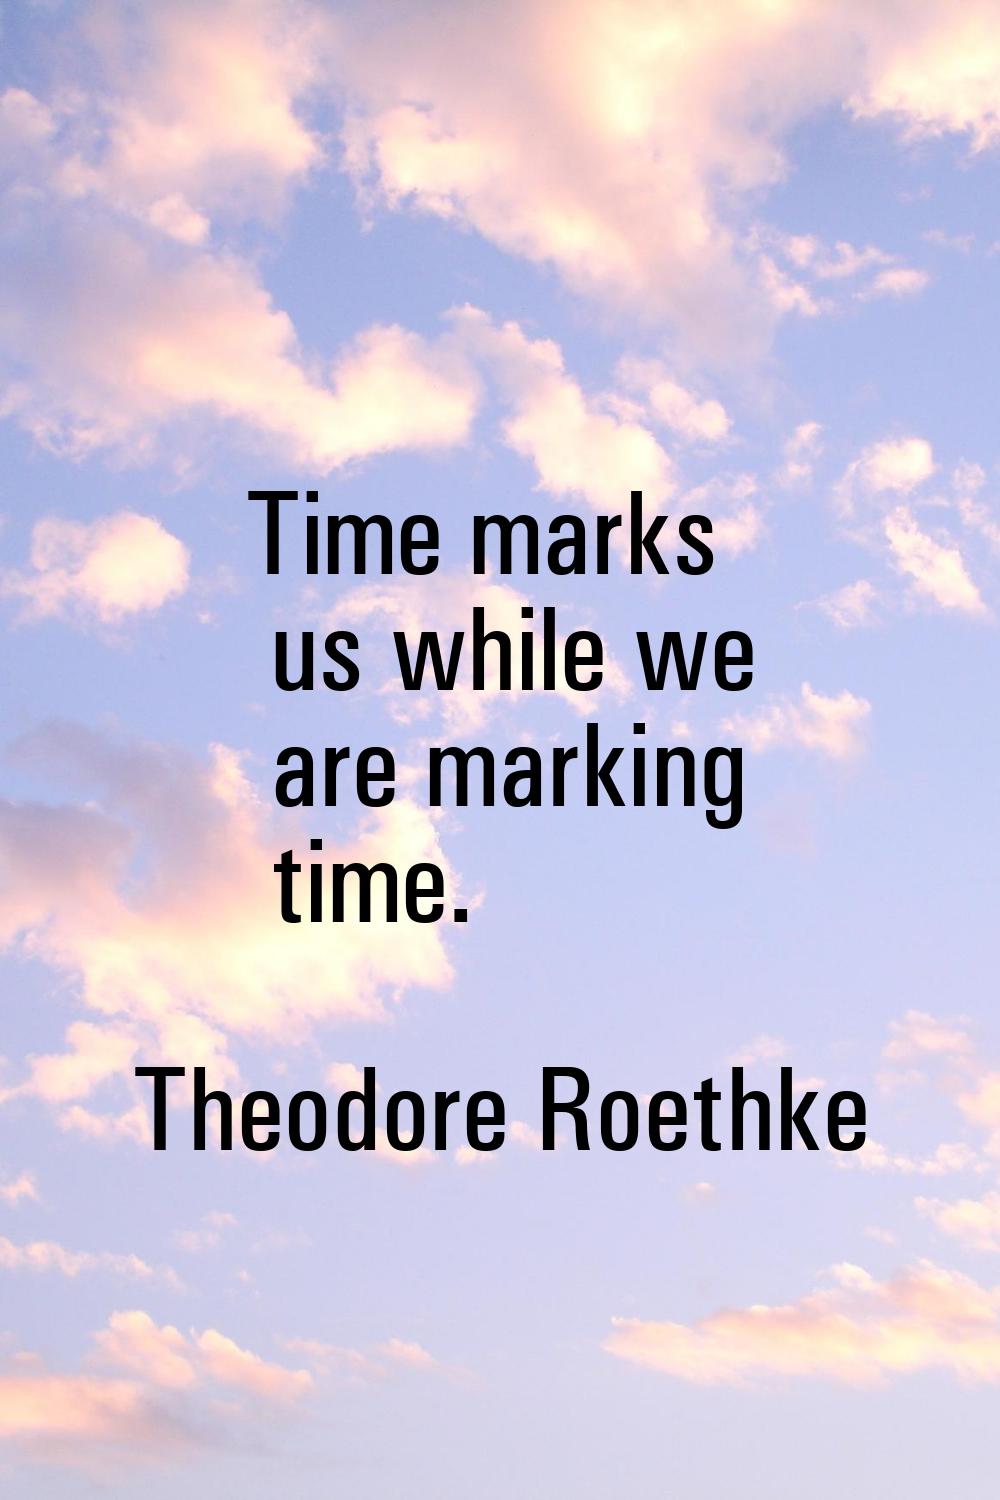 Time marks us while we are marking time.